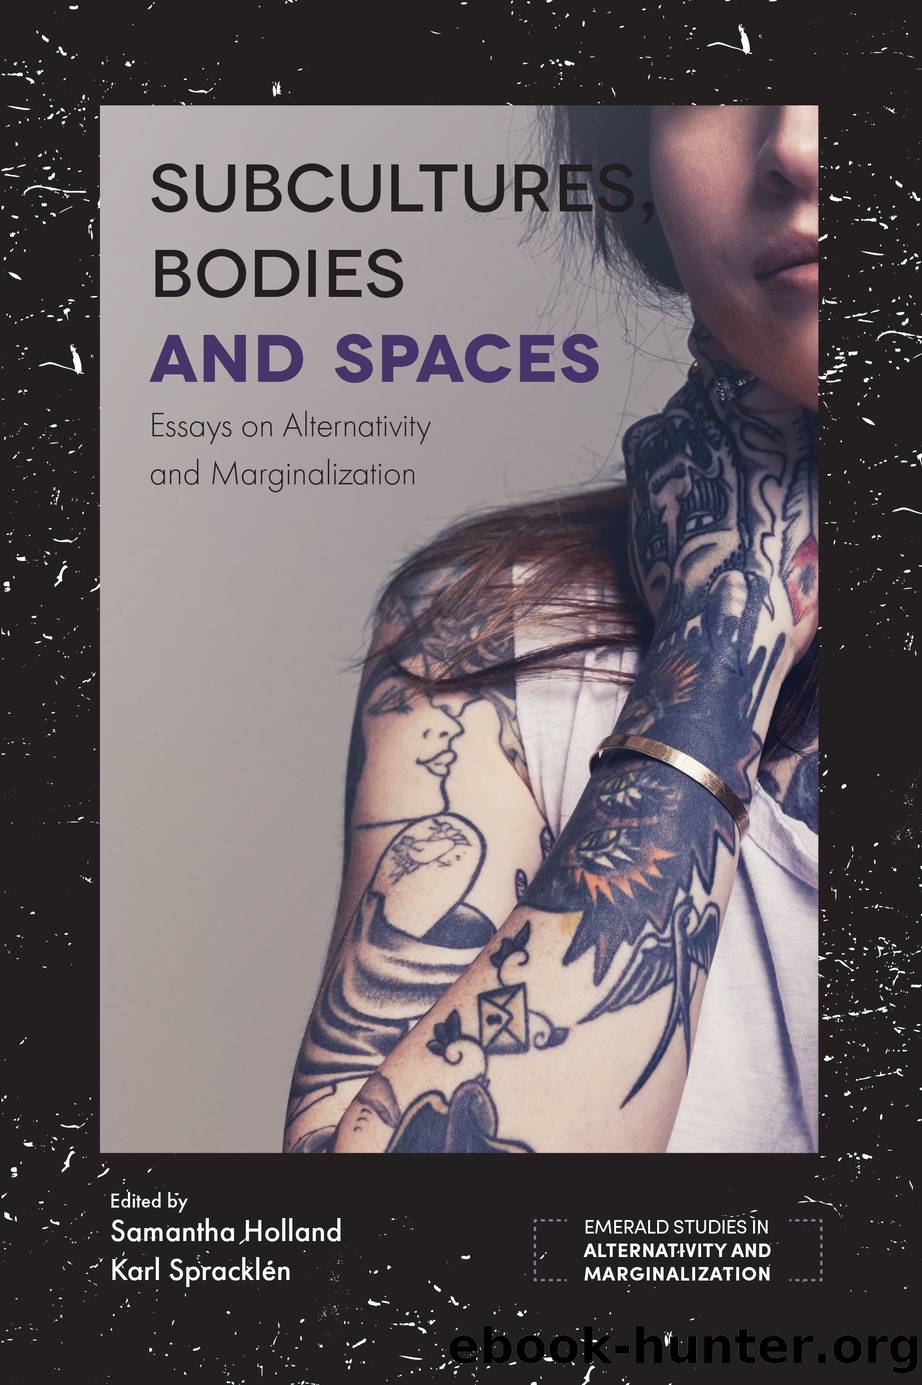 Subcultures, Bodies and Spaces by Samantha Holland Karl Spracklen